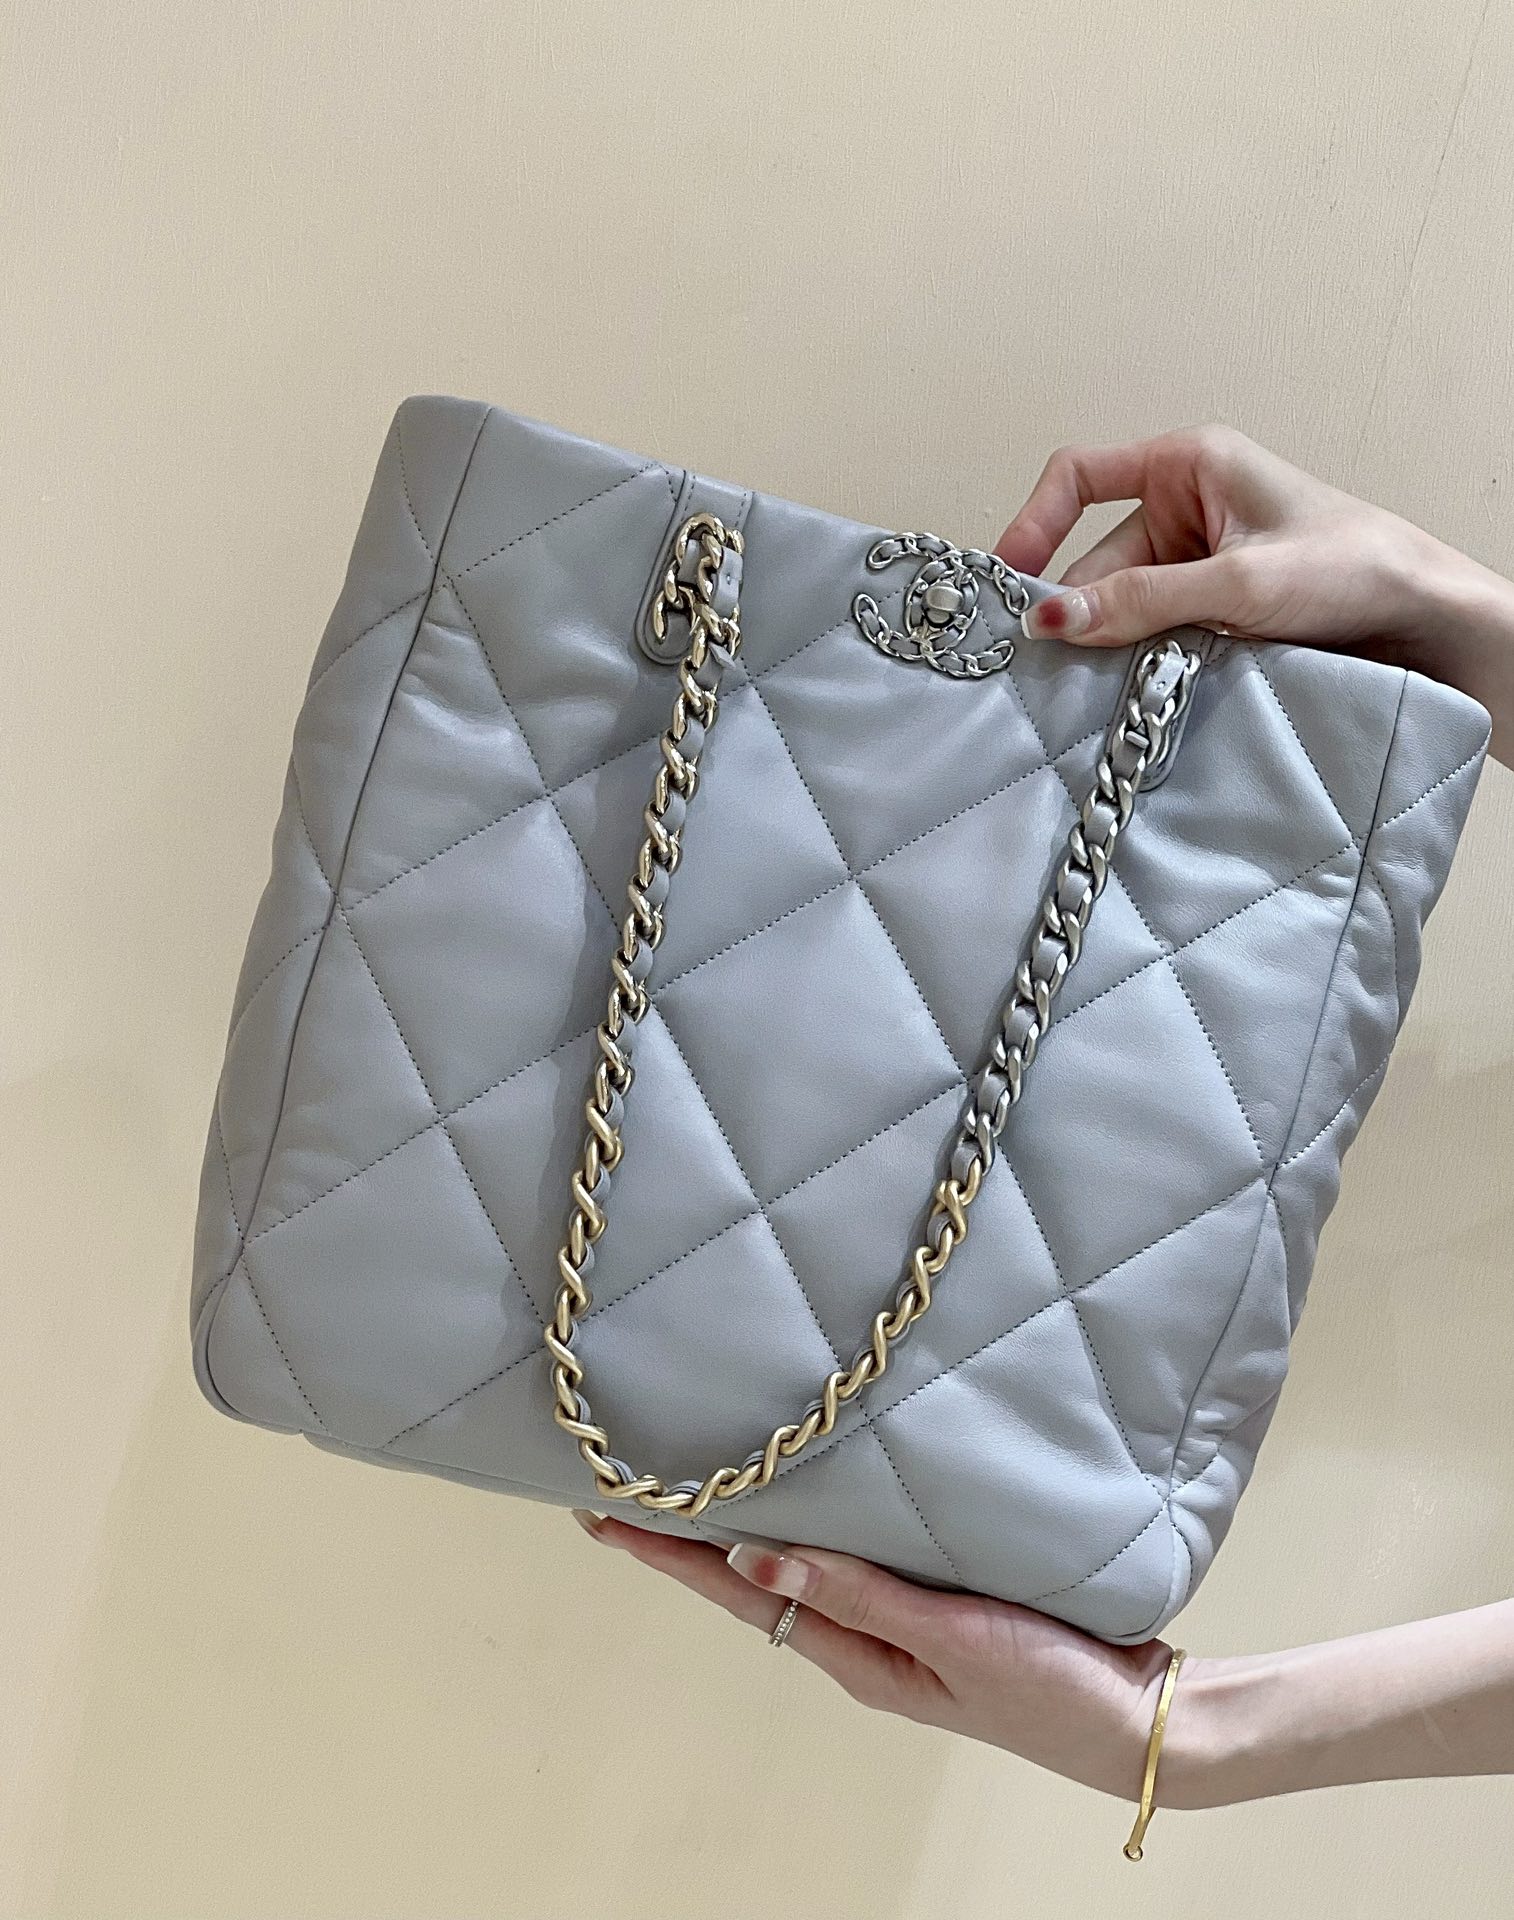 Chanel Grey Quilted Caviar Leather Small Boy Flap Bag  STYLISHTOP